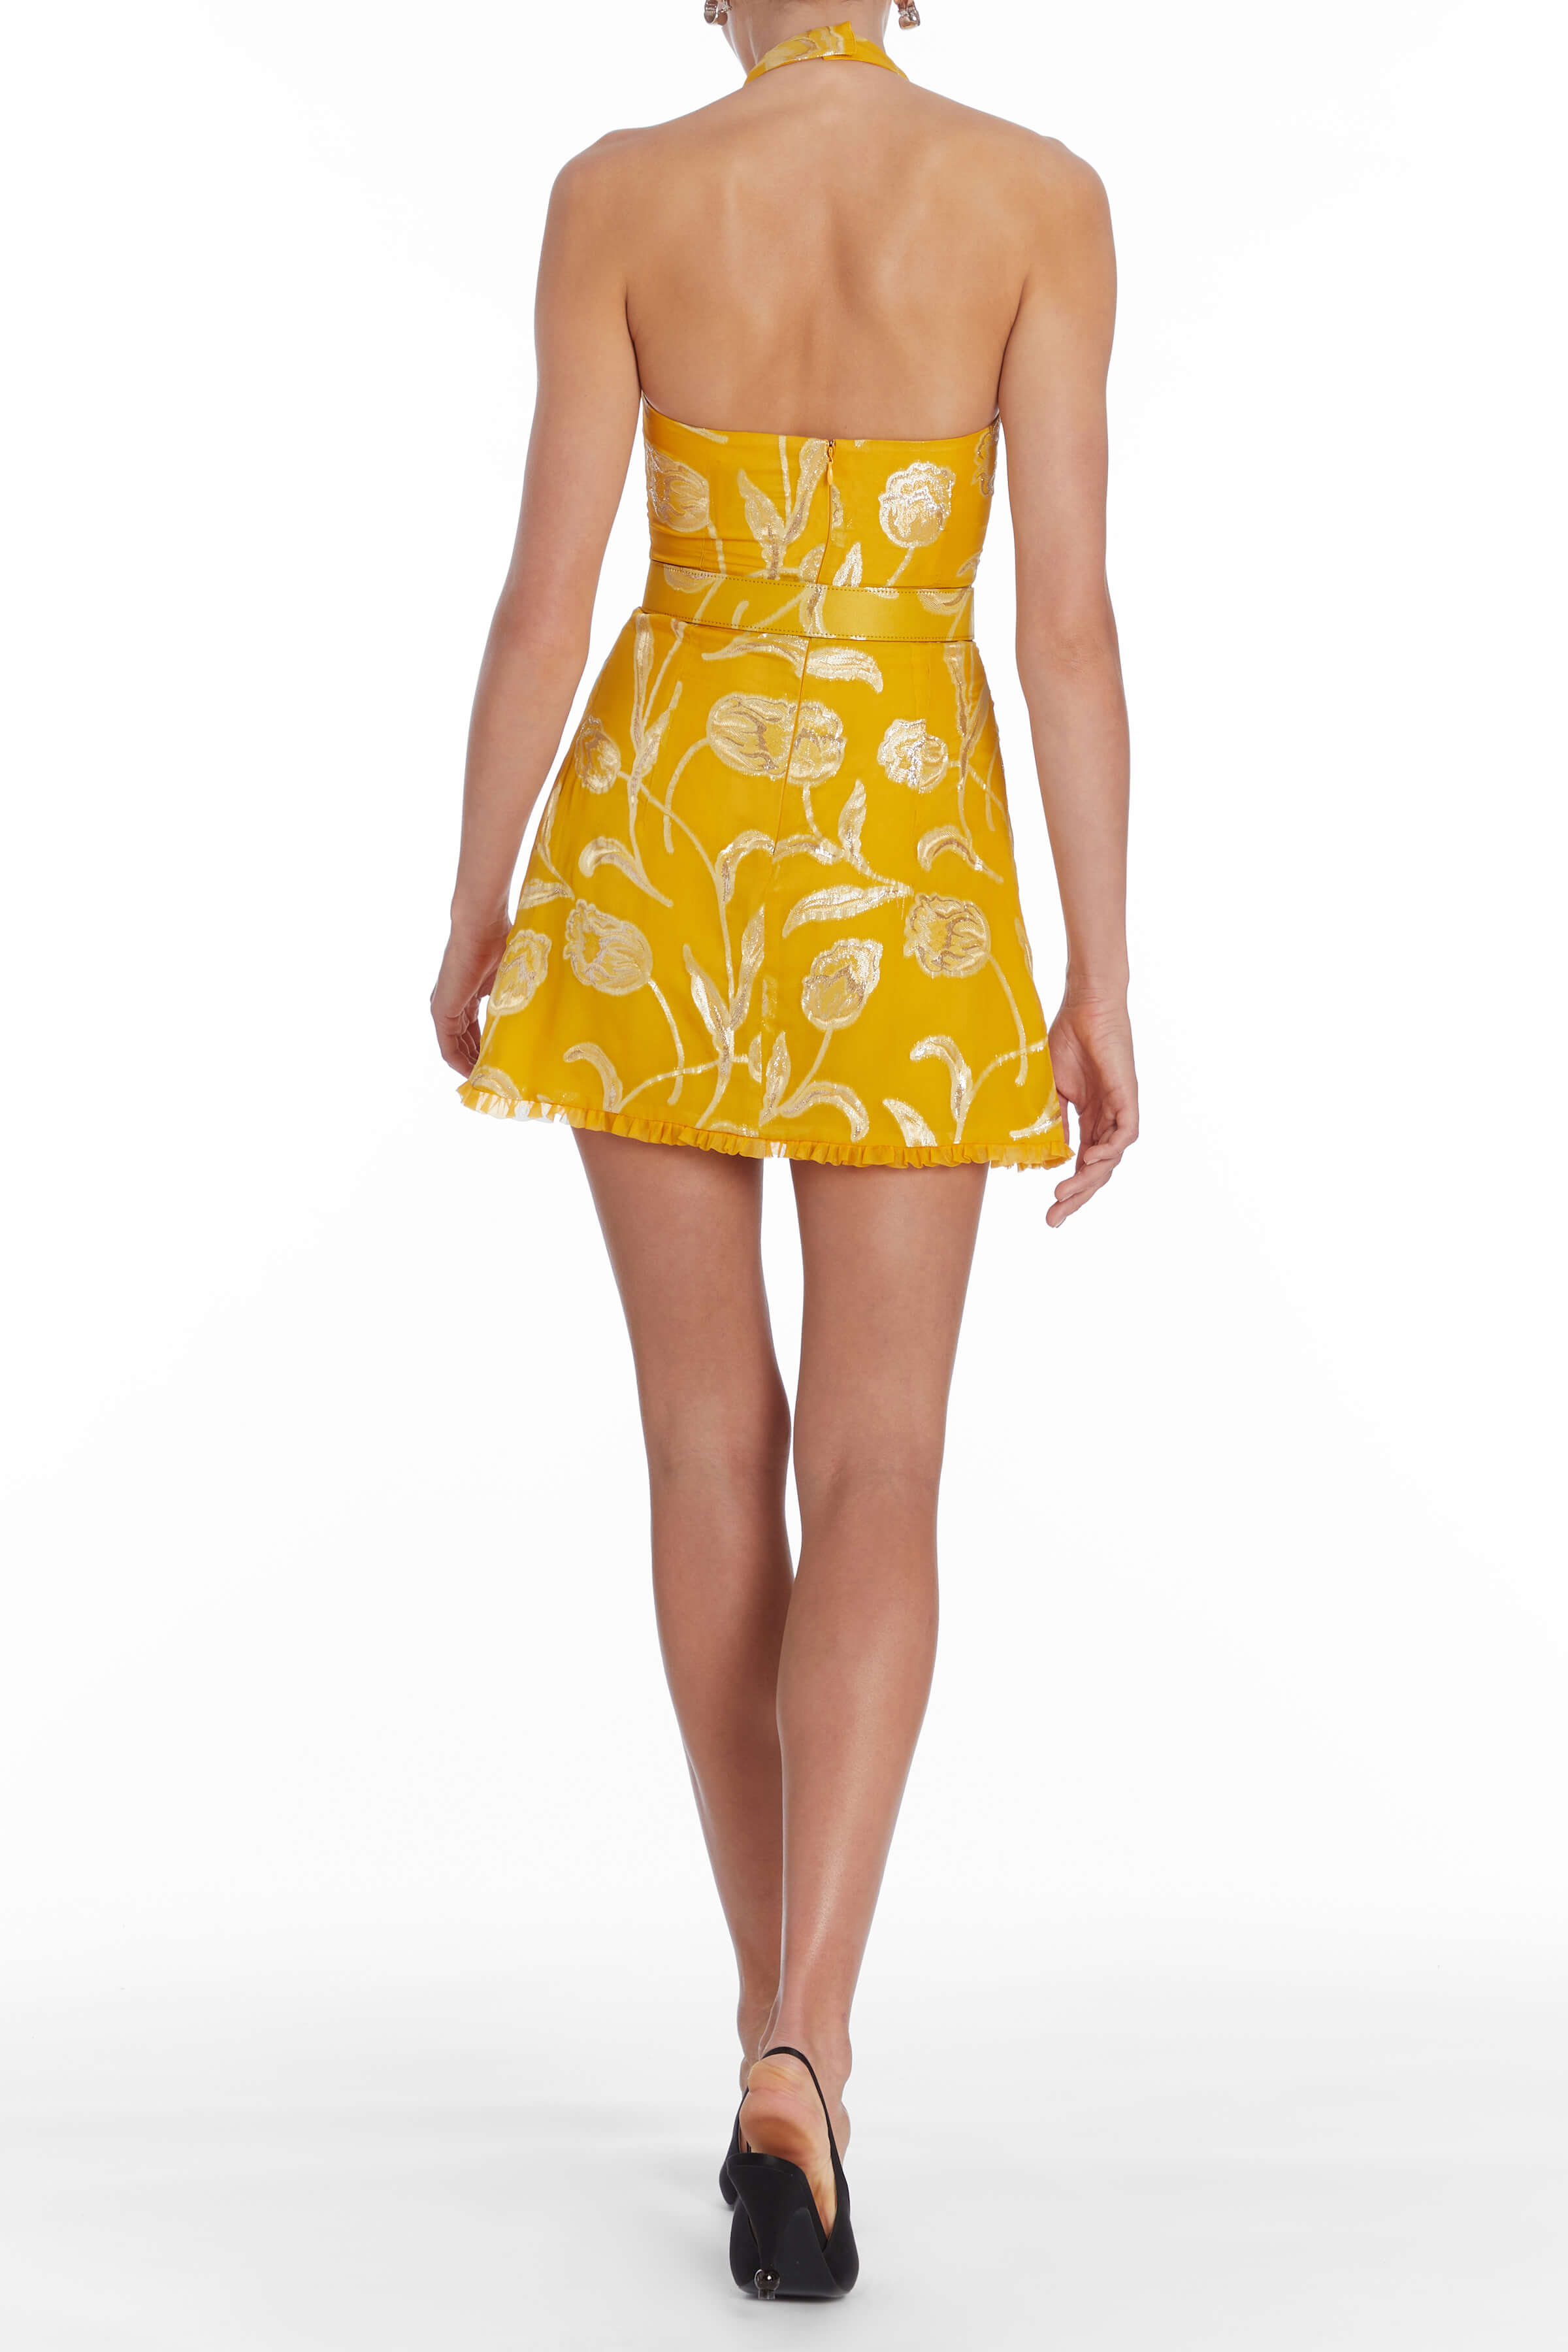 Agave Yellow Floral Halter Mini Dress With Belt